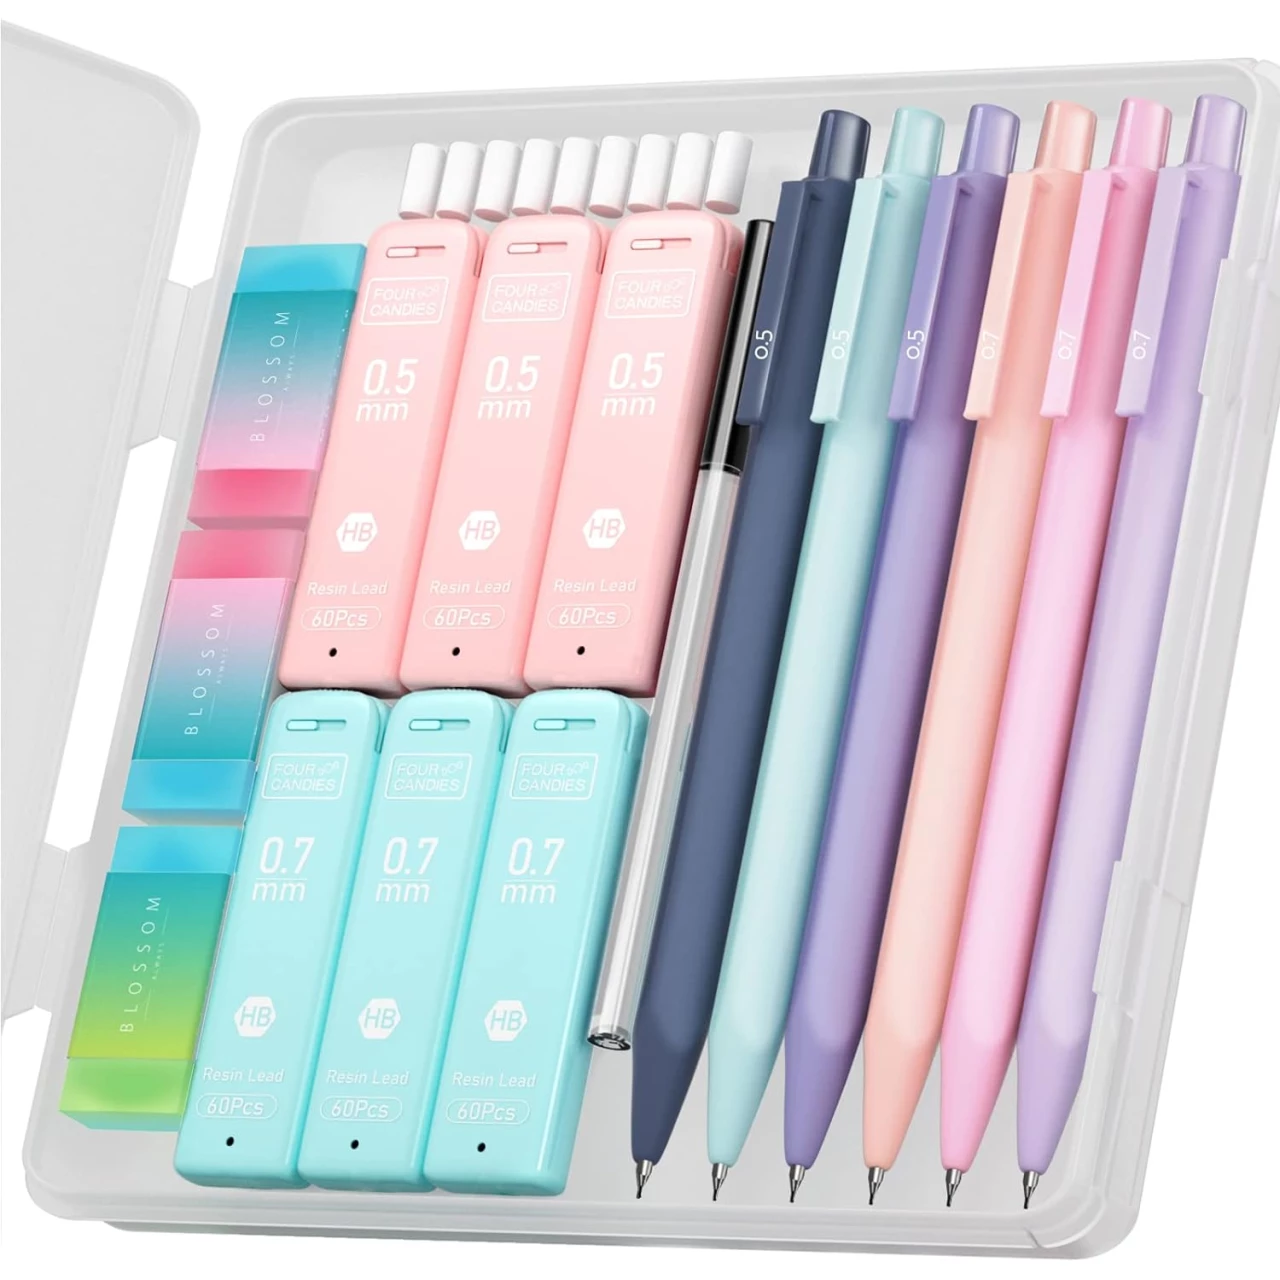 Four Candies Cute Mechanical Pencil Set, 6PCS Pastel Mechanical Pencils 0.5mm &amp; 0.7mm with 360PCS HB Pencil Leads, 3PCS Erasers and 9PCS Eraser Refills, Aesthetic Mechanical Pencils for Girls Writing